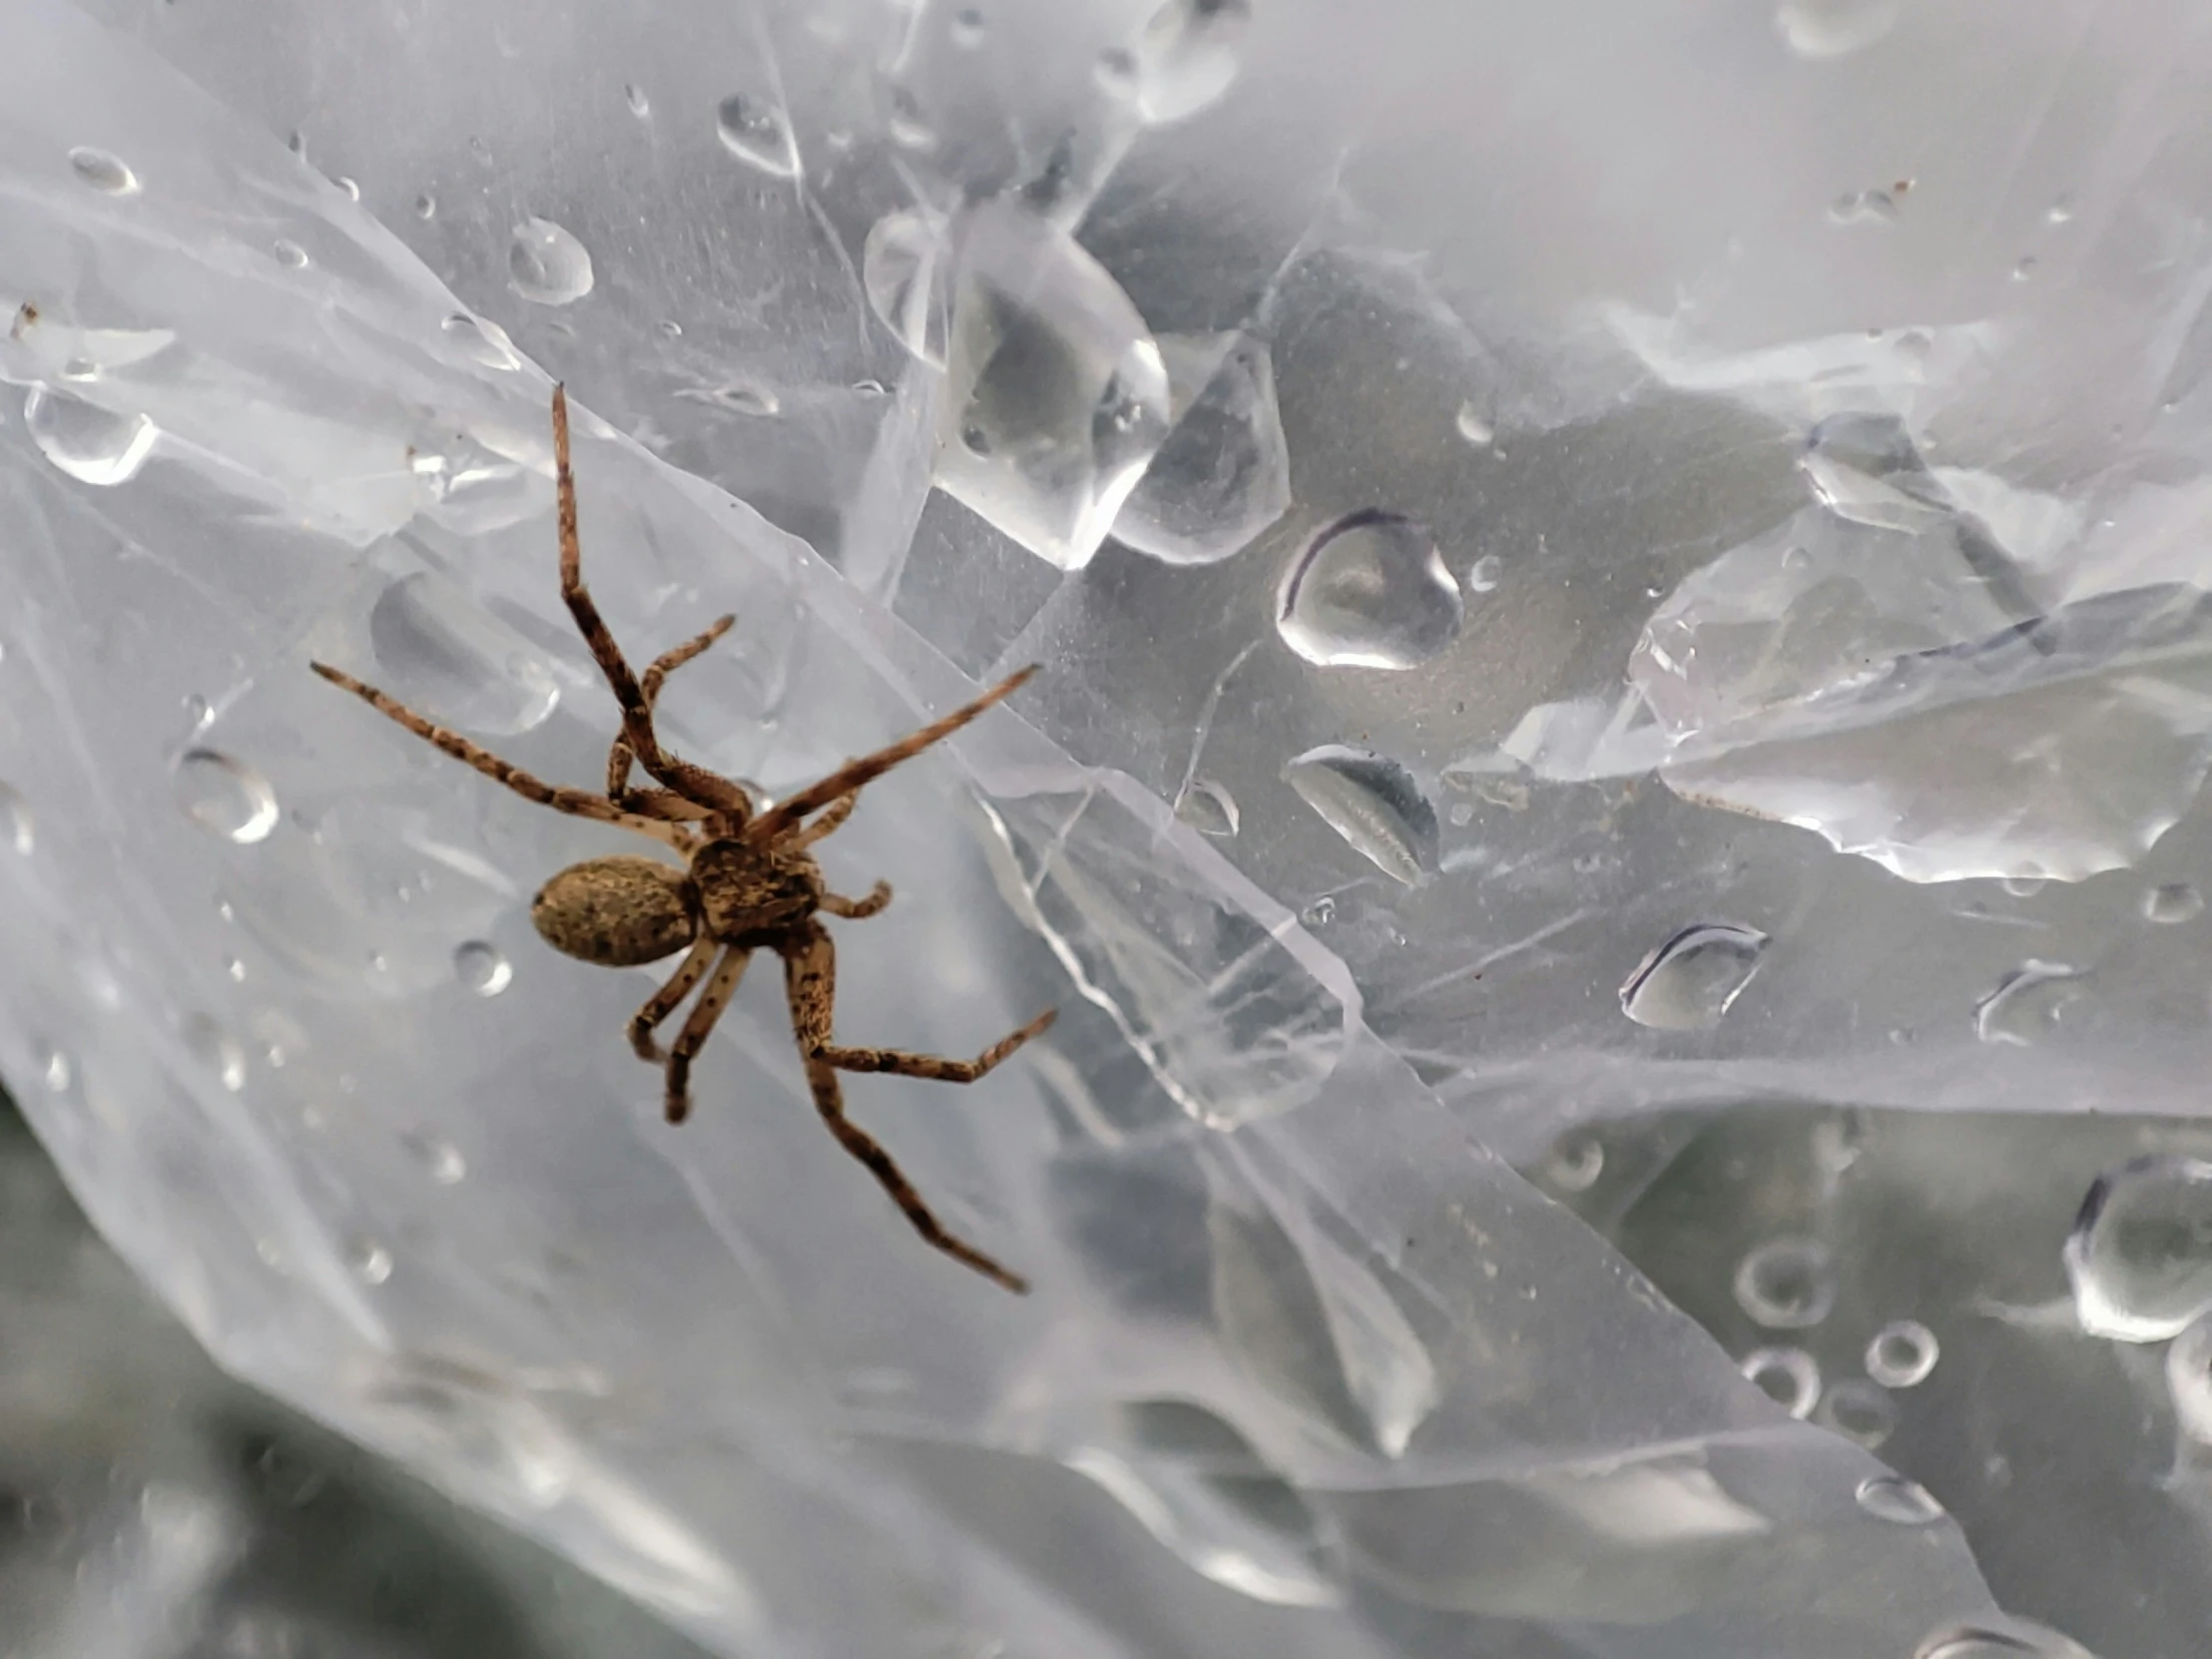 a close up s of a small spider on ice